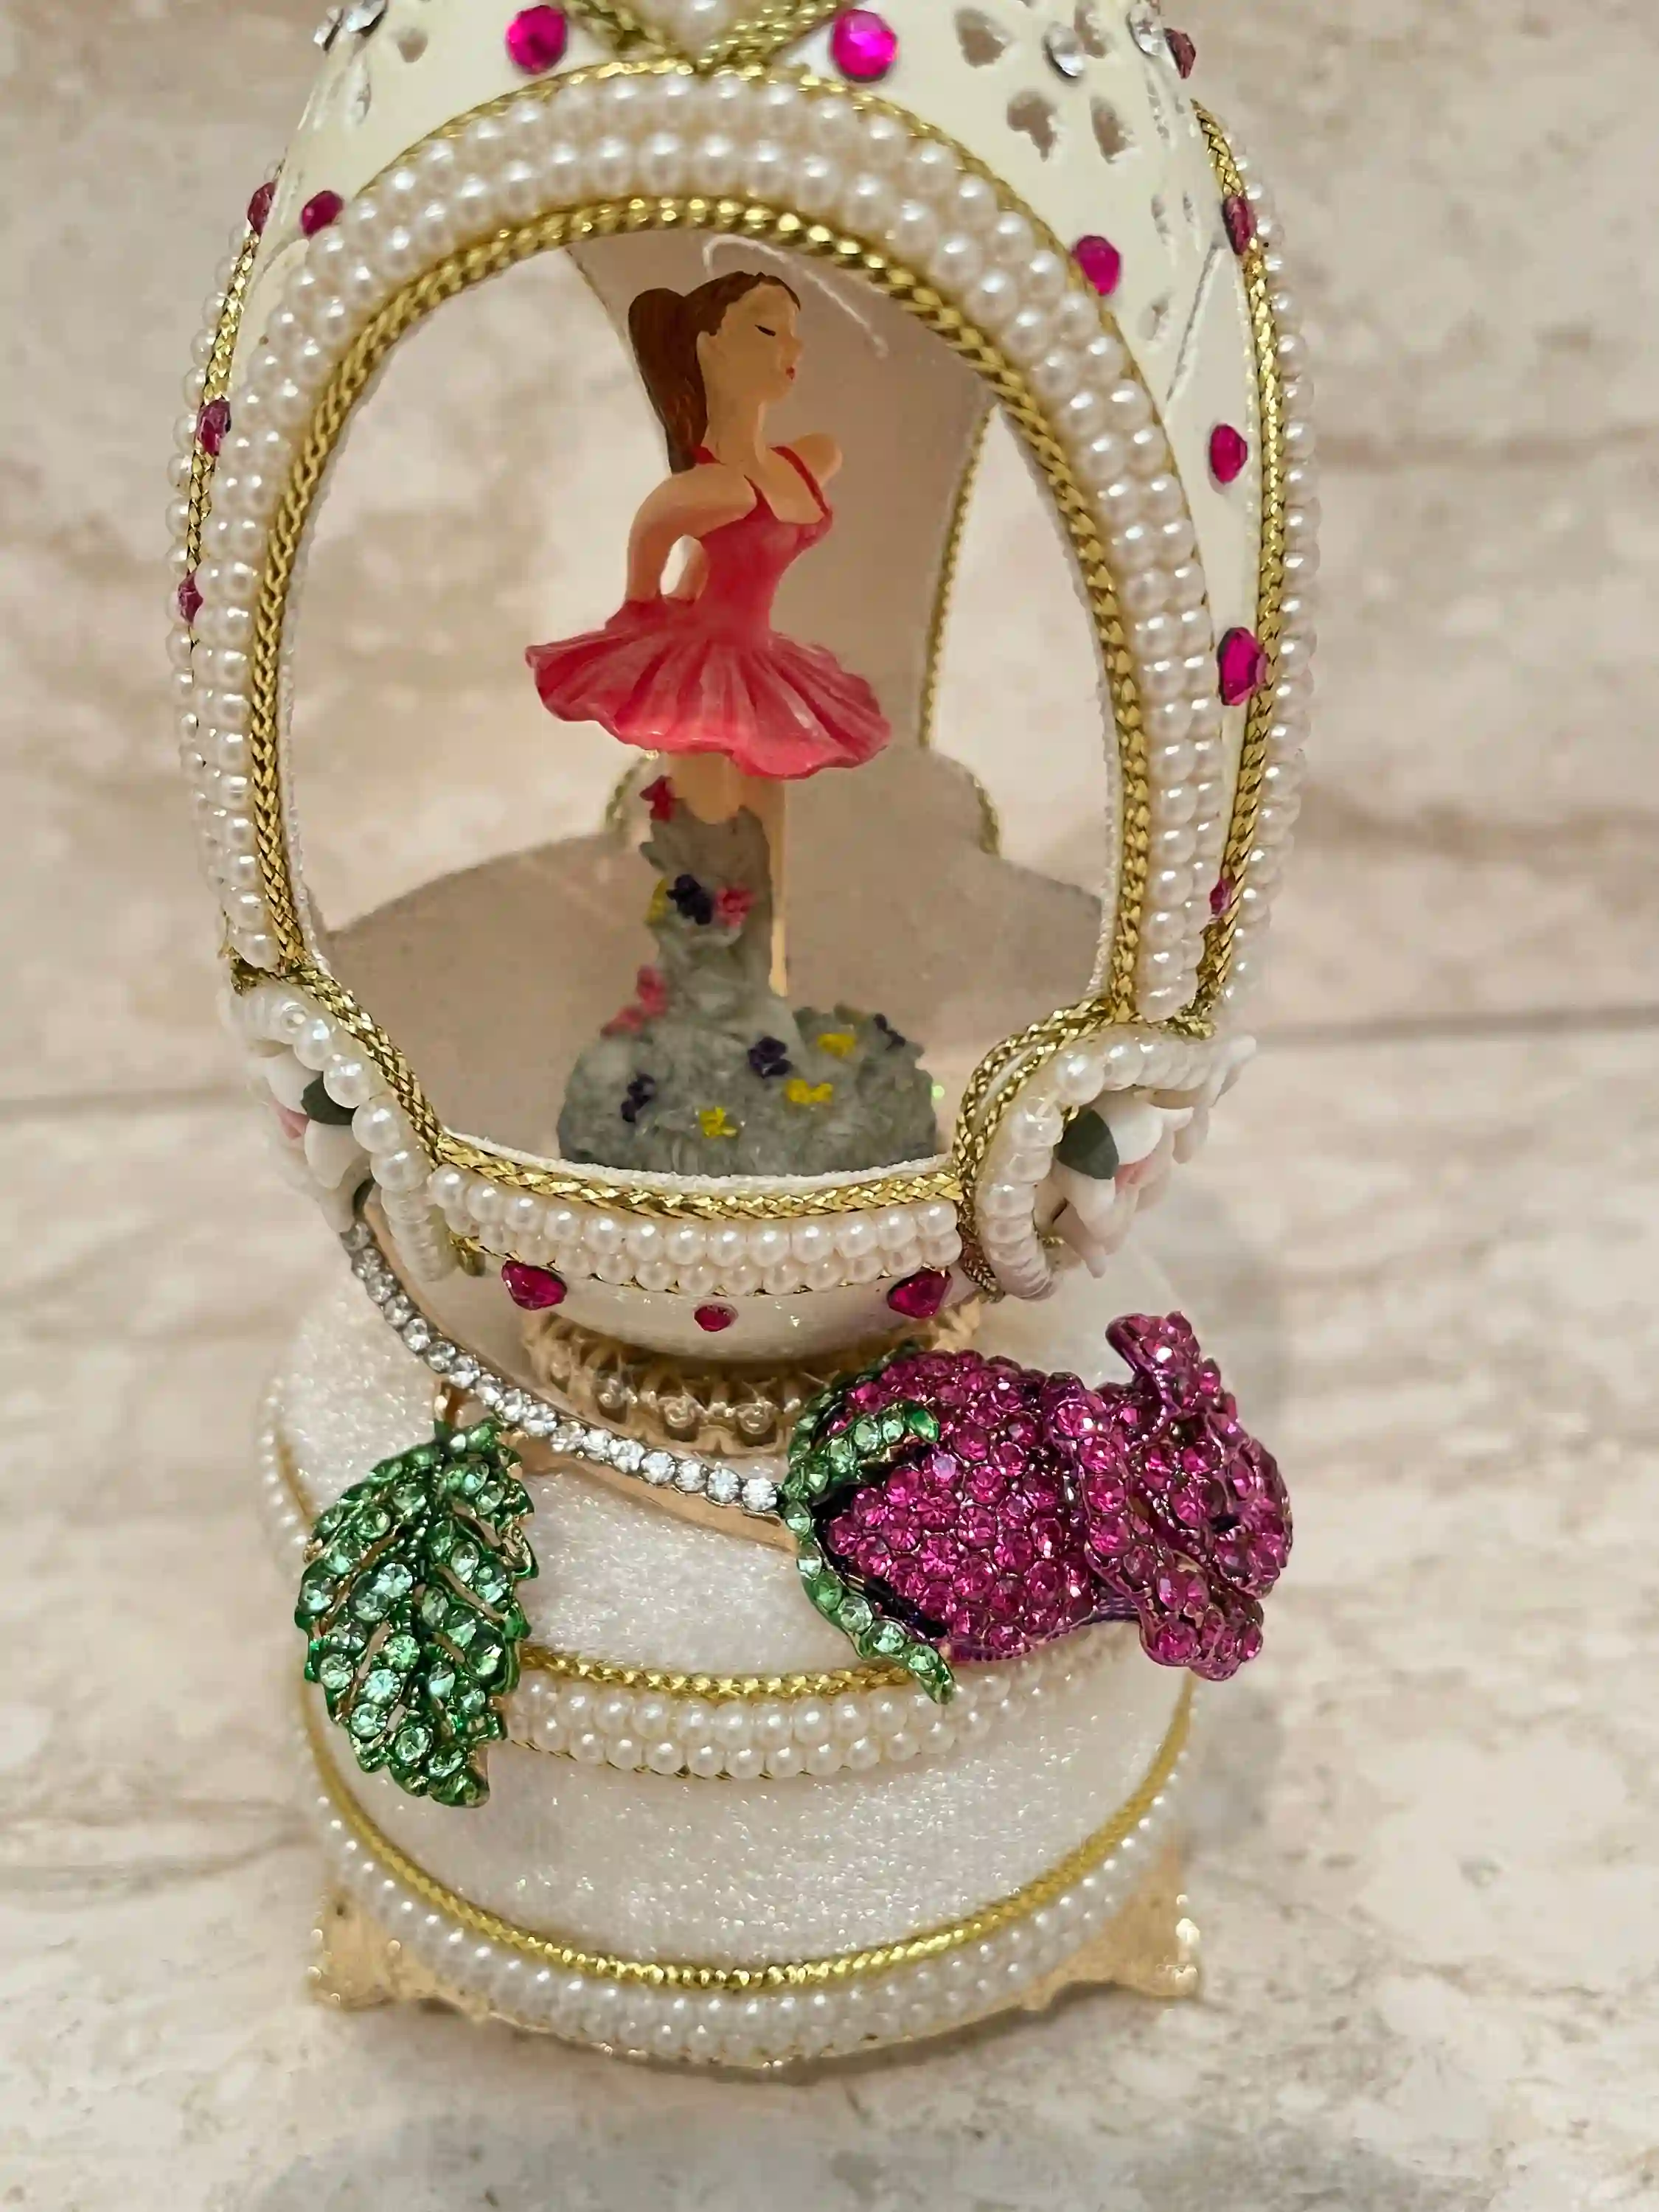 Luxurious 18th birthday Gift for Granddaughter 2005 PINK Faberge Egg Music Box & Faberge Egg Style NECKLACE BALLET Gift for Ballerina Ballet 